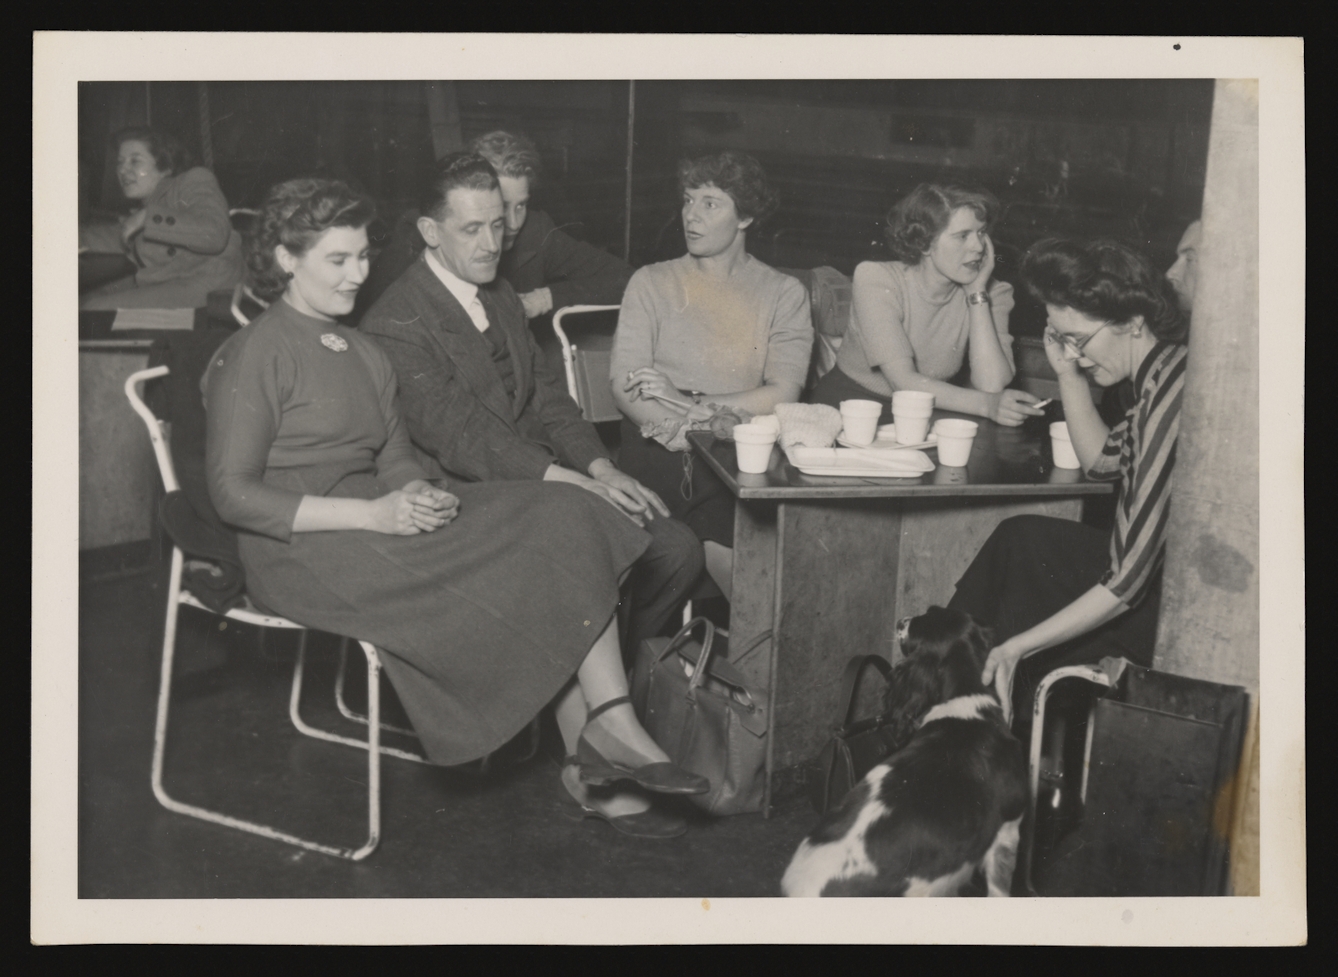 Black and white photograph showing a group of young men and women sitting around a table.